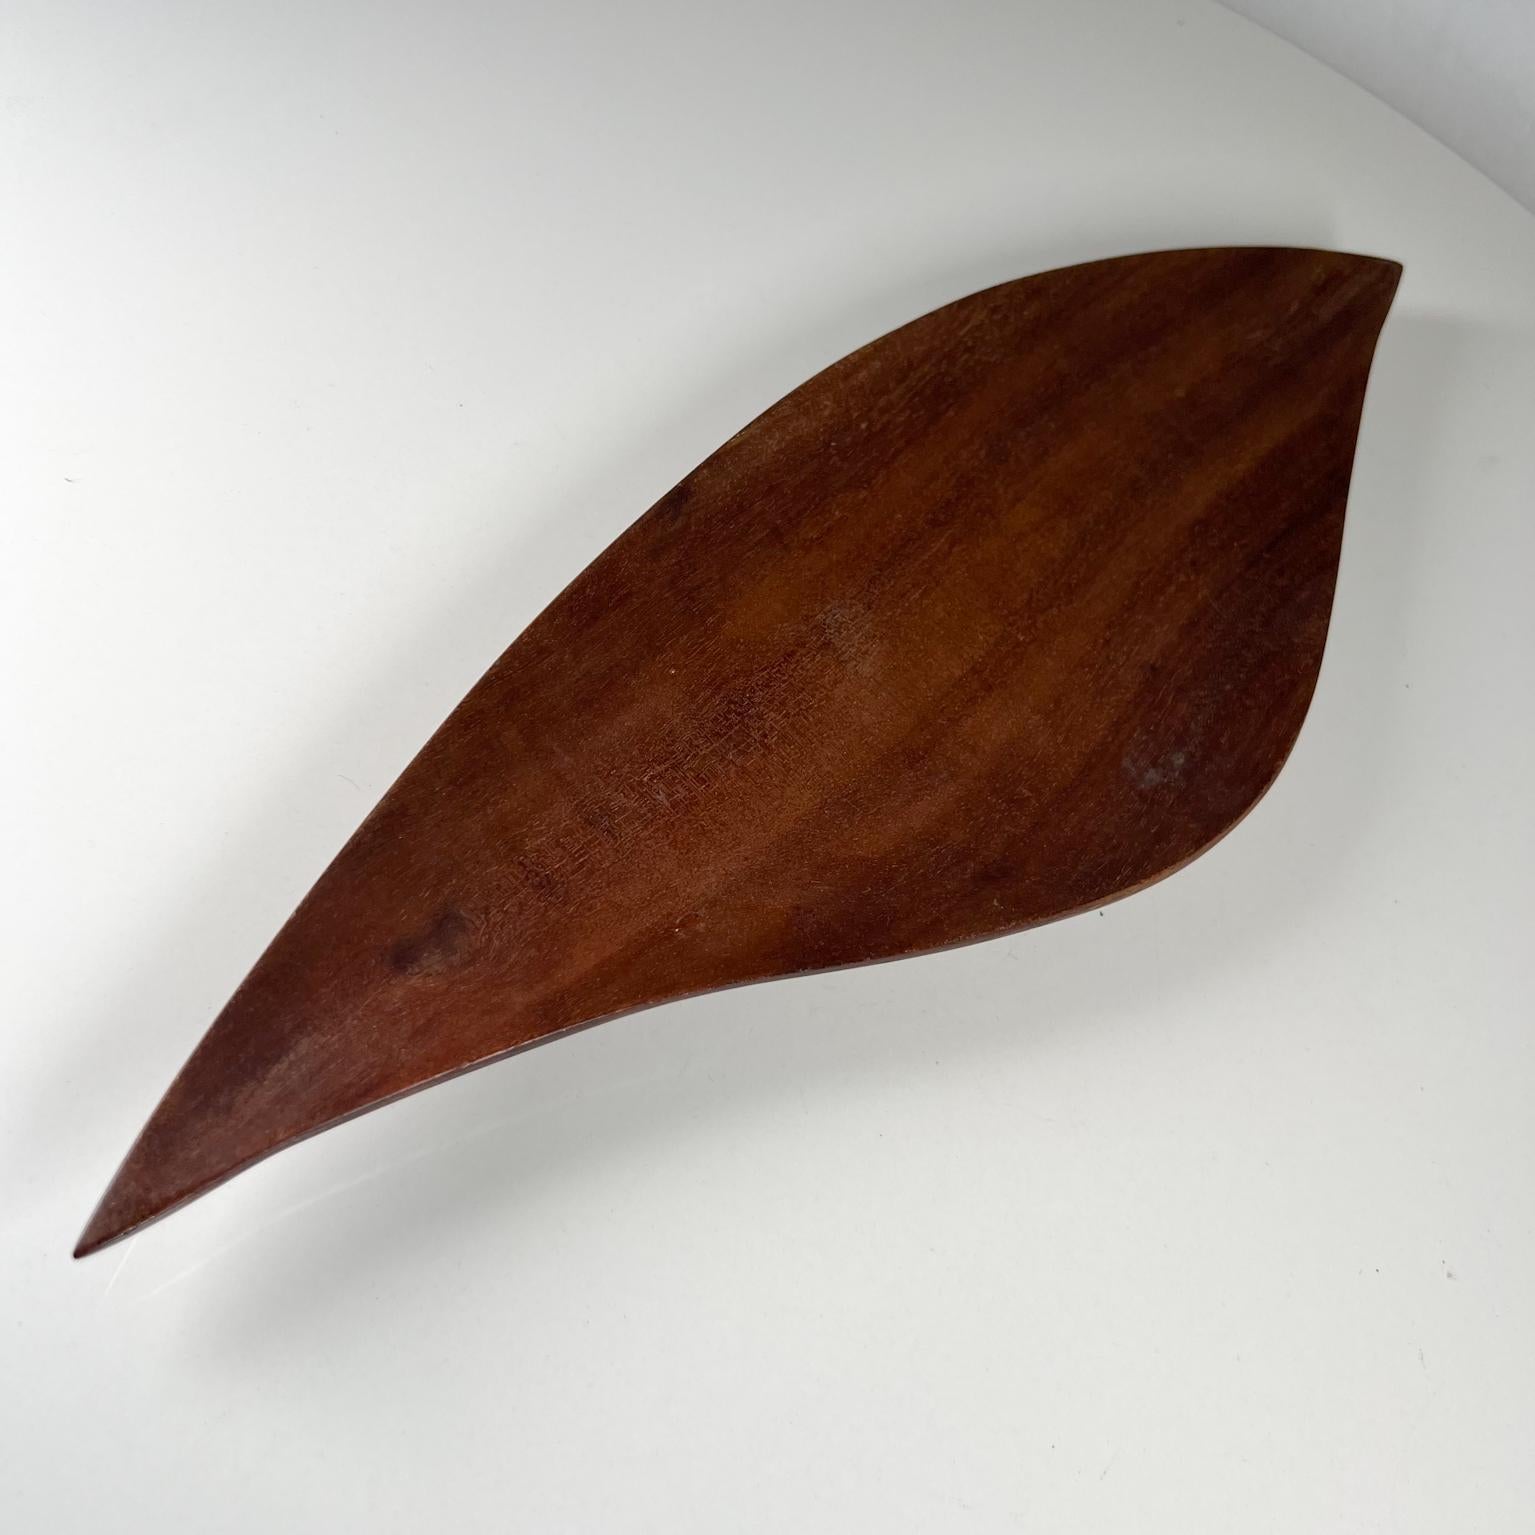 1970s modern Haiti sculptural dish wood tray organic form.
Stamped numbered.
15.75 x 5.13 x 1 tall
Unrestored original vintage
See images provided.